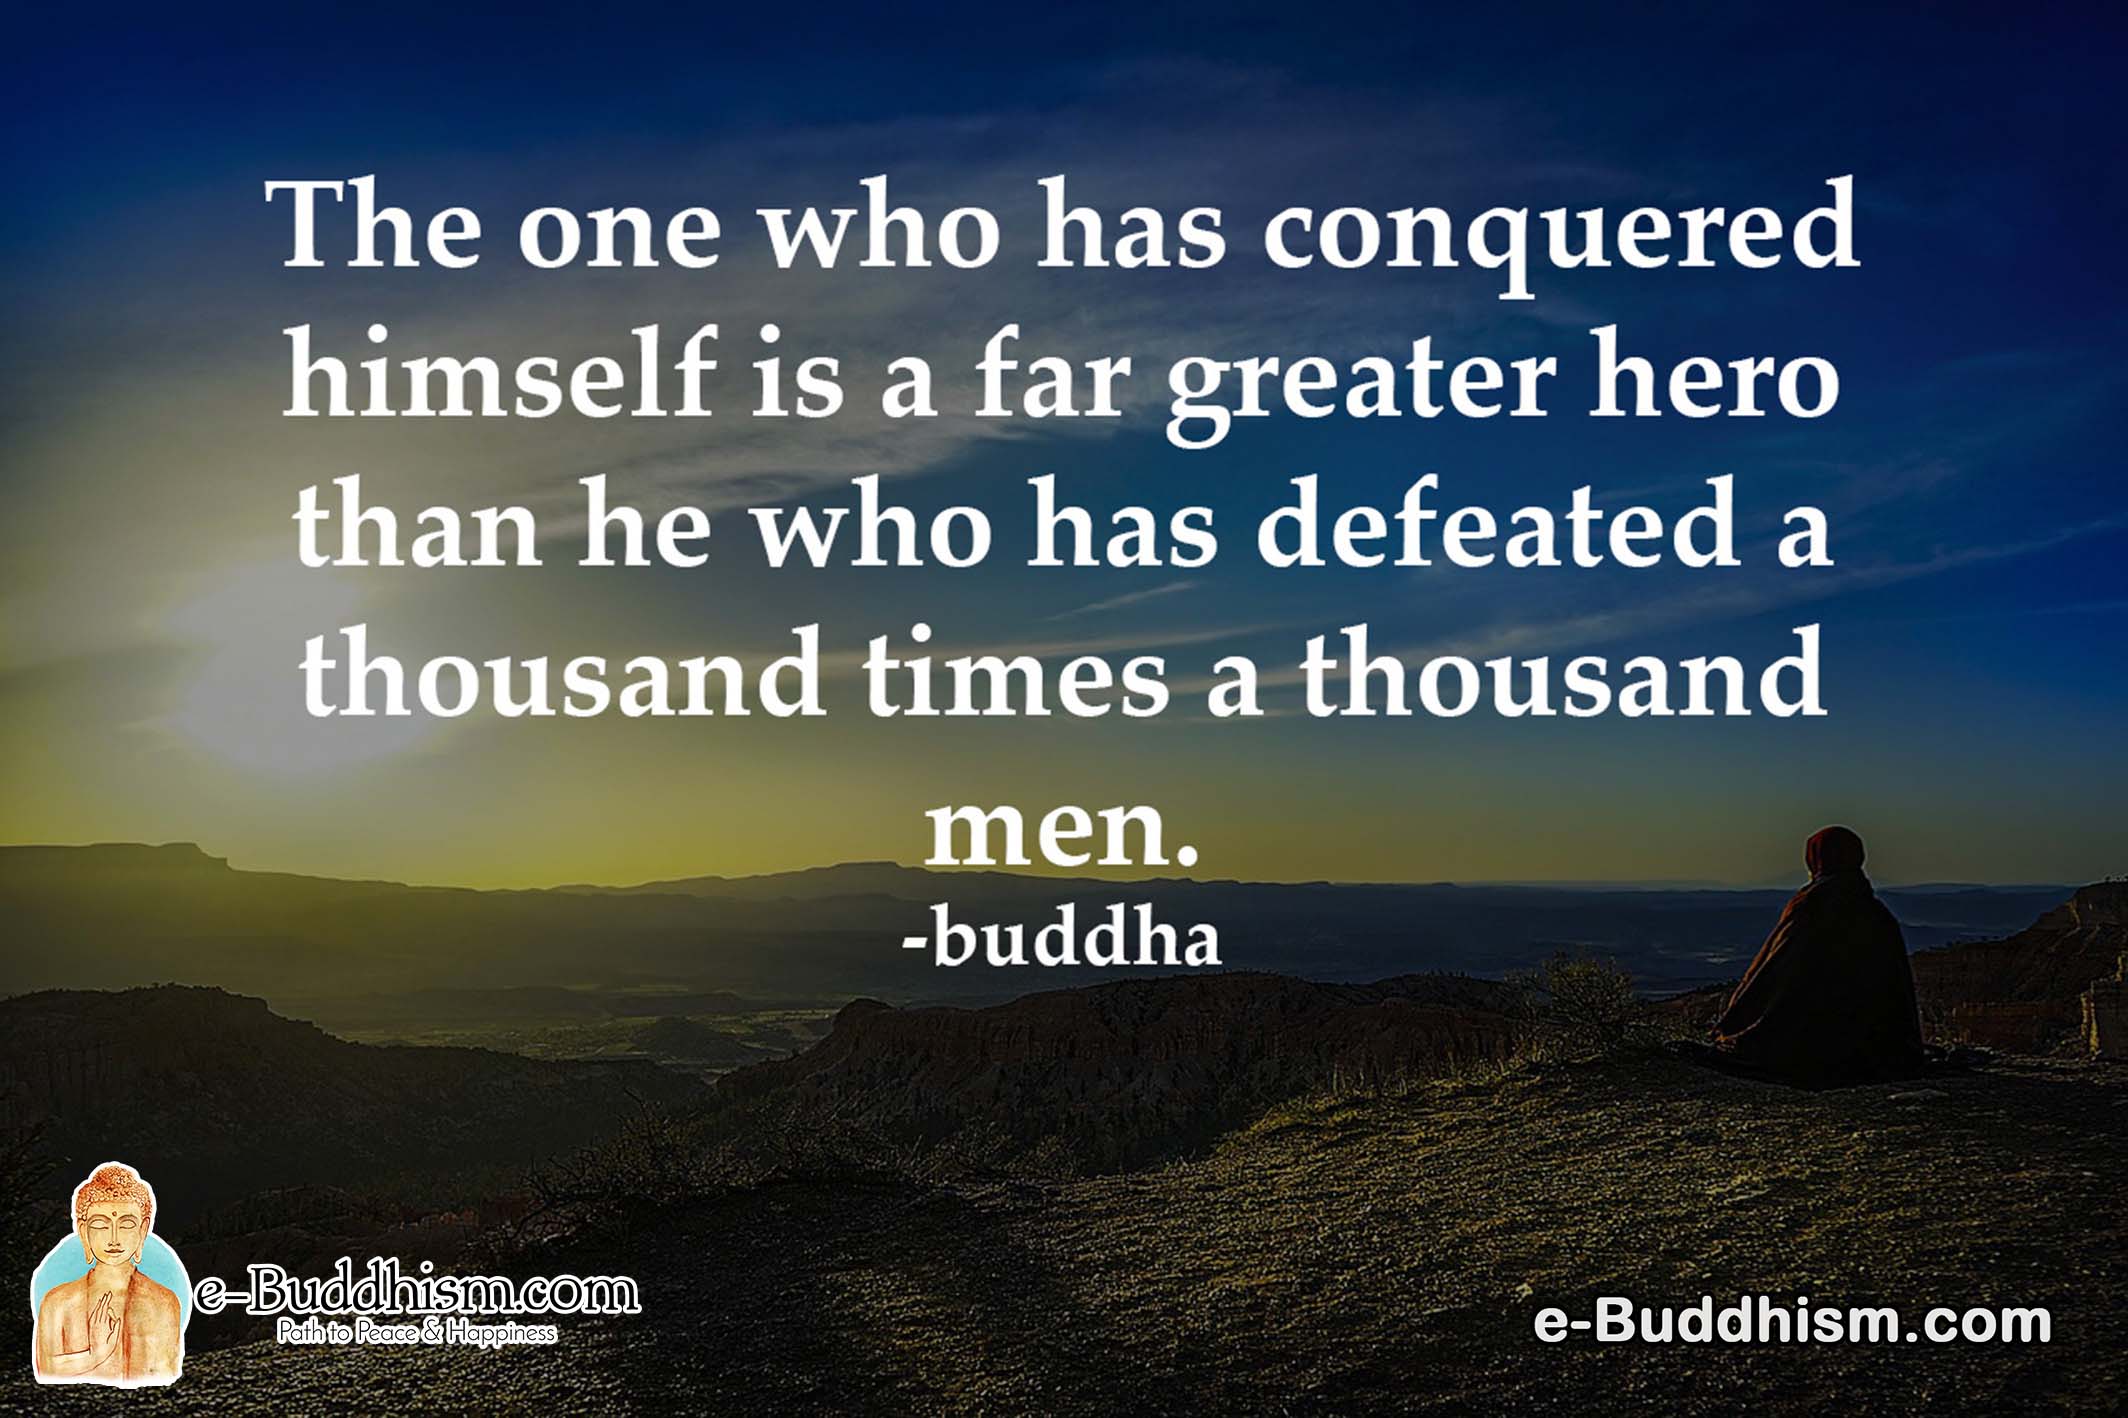 The one who has conquered himself is a far greater hero than he who has defeated a thousand times a thousand men. -Buddha